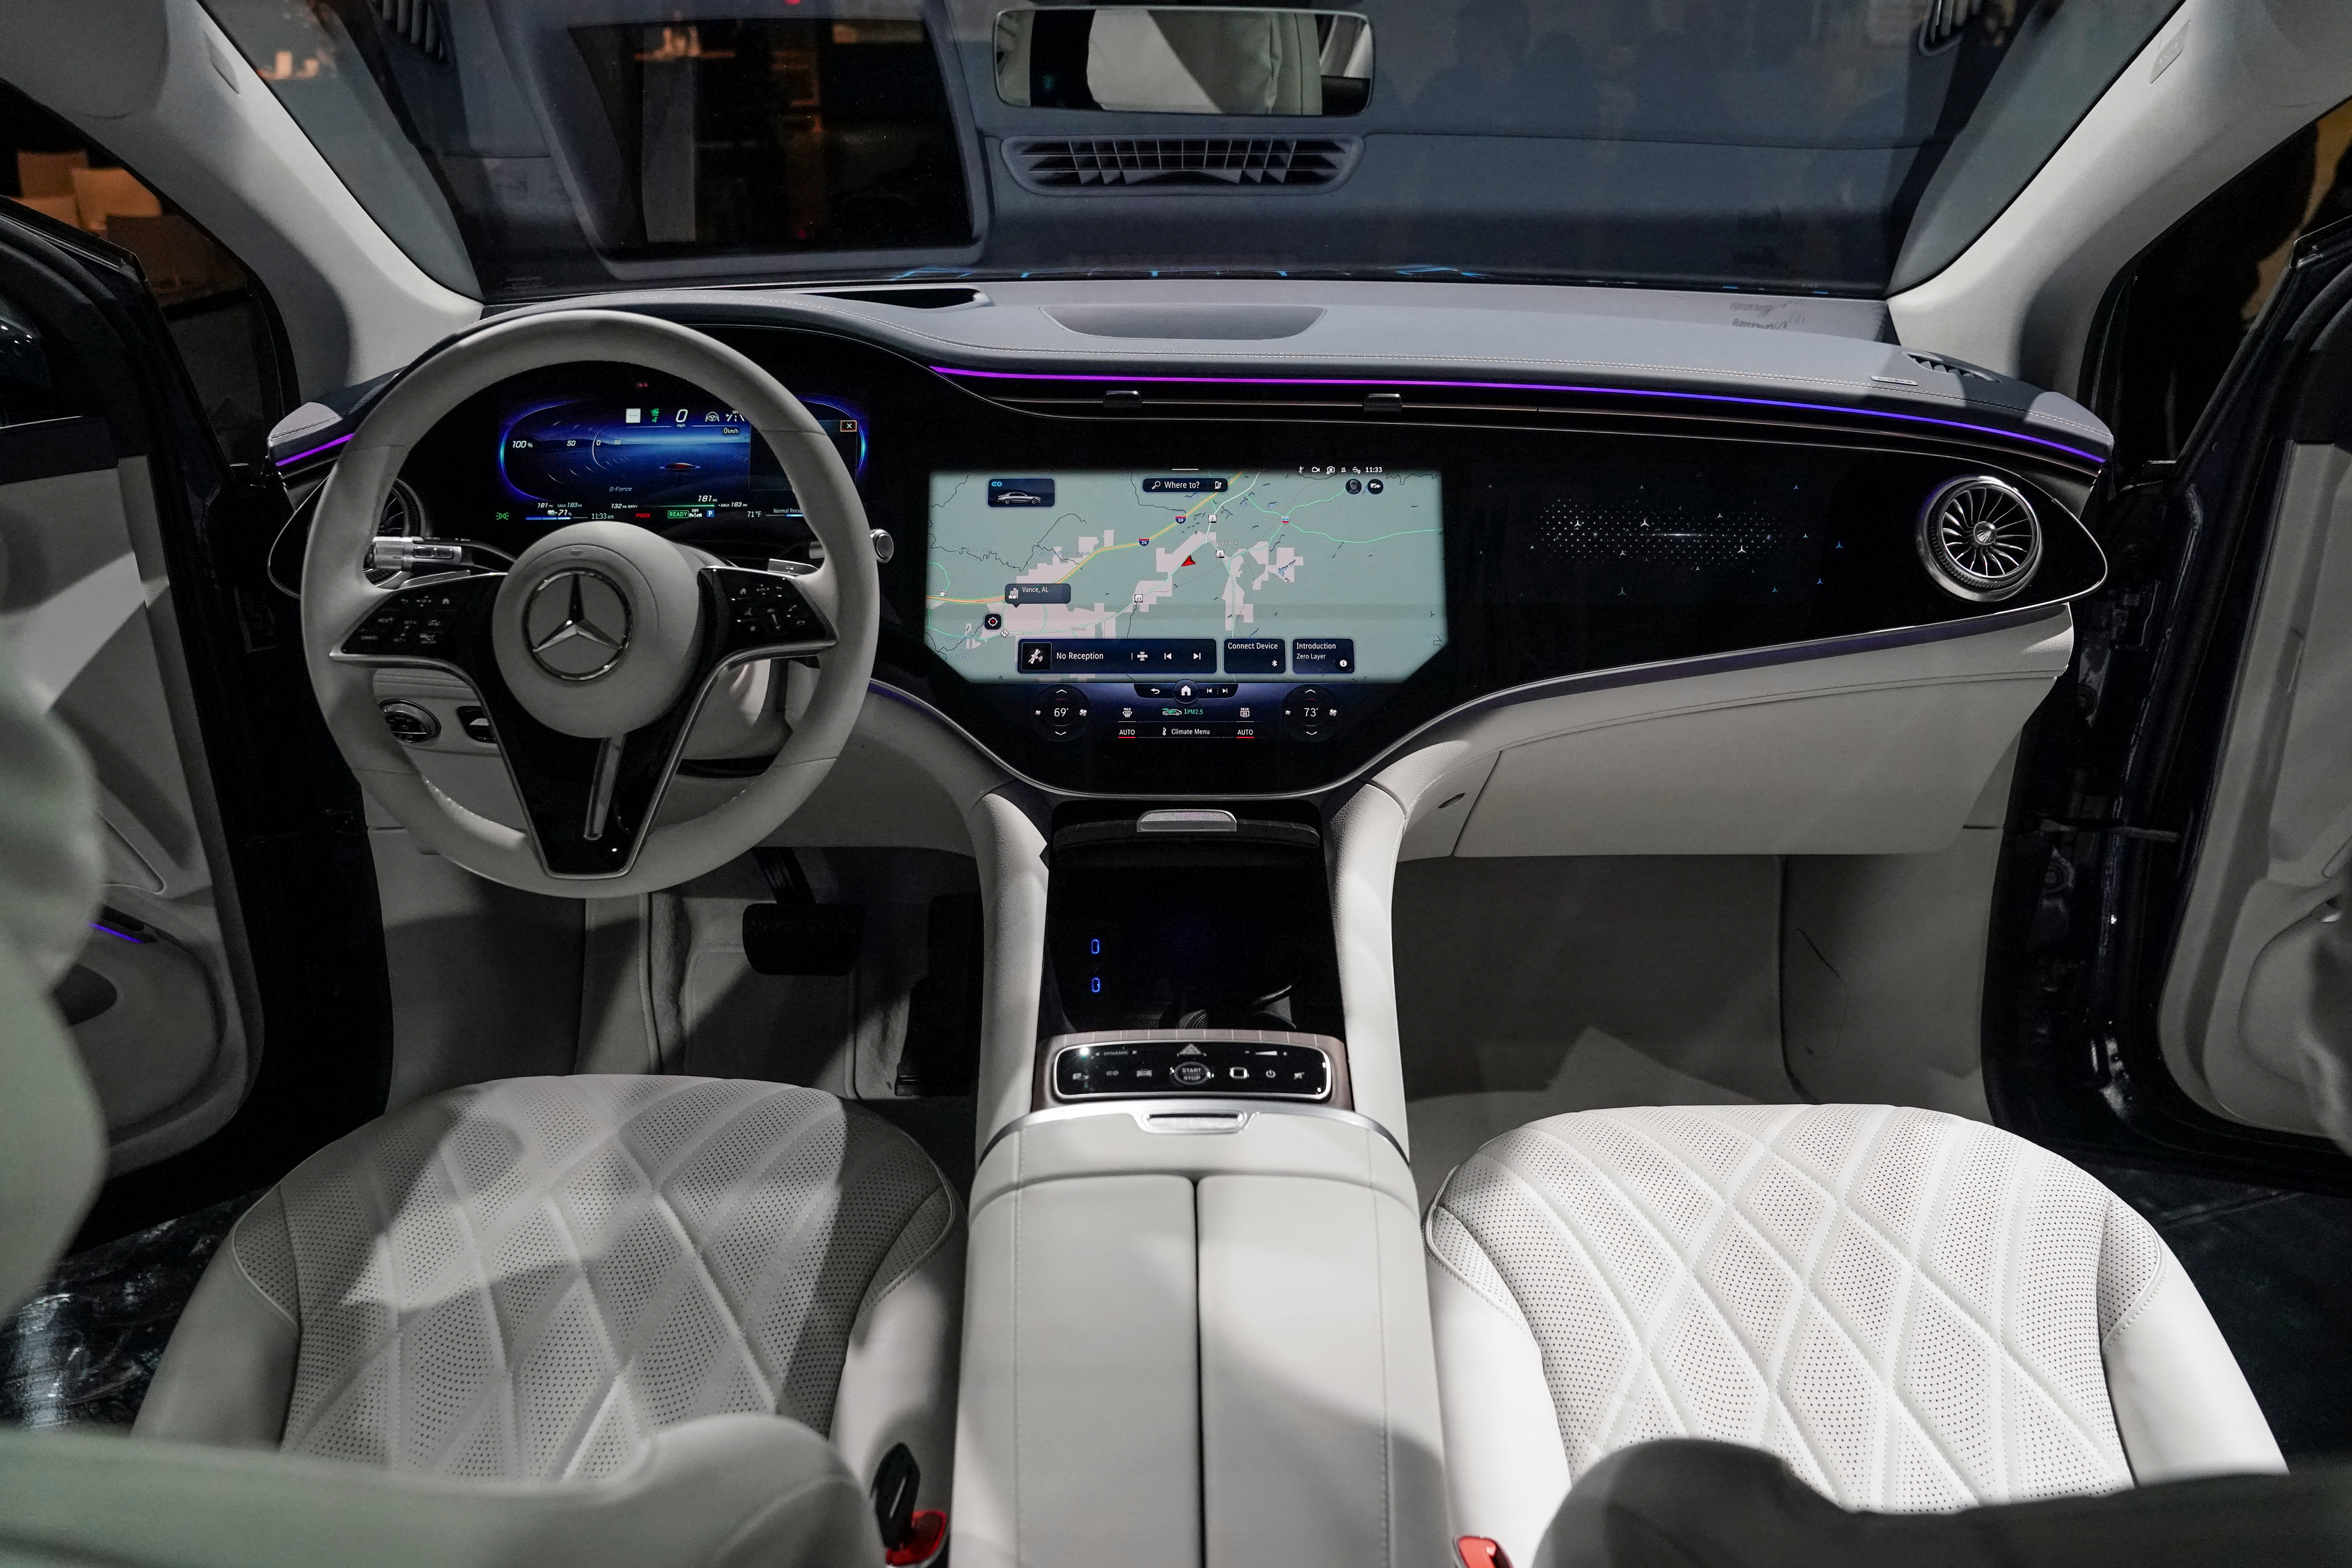 The interior of the new all-electric EQS SUV is seen at the opening of the Battery Factory for the Mercedes-Benz plant in Tuscaloosa